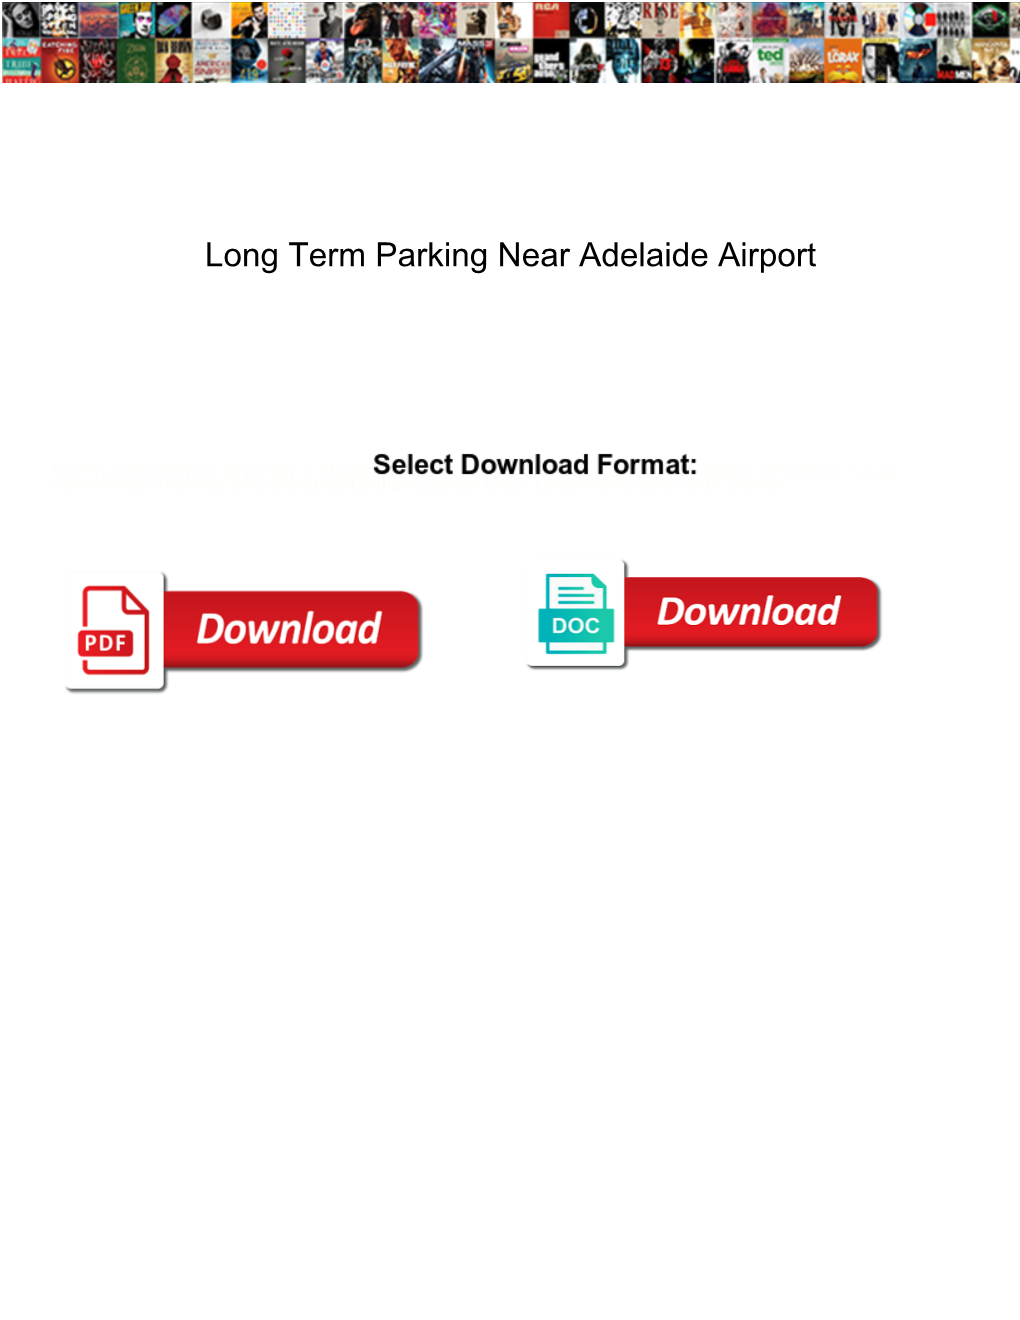 Long Term Parking Near Adelaide Airport